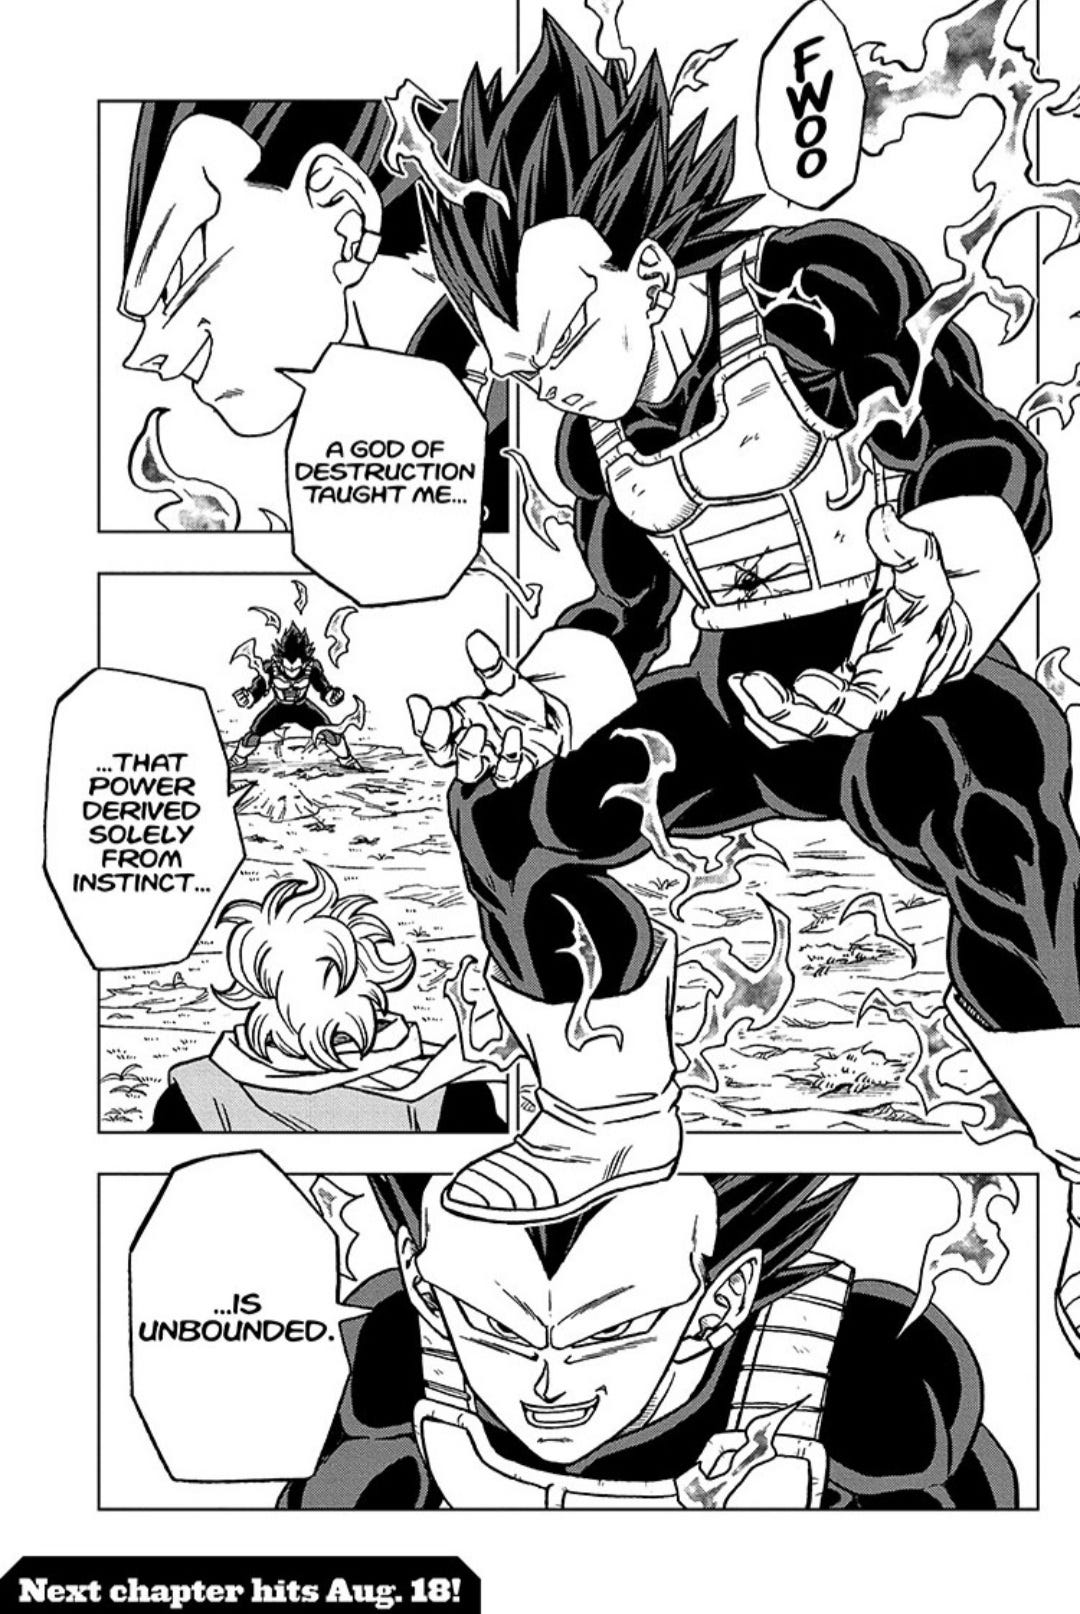 Dragon Ball Super Manga Chapter 74 Page by Page Review! Prince of  Destruction Vegeta Has Arrived!, by Friendly Sole INC